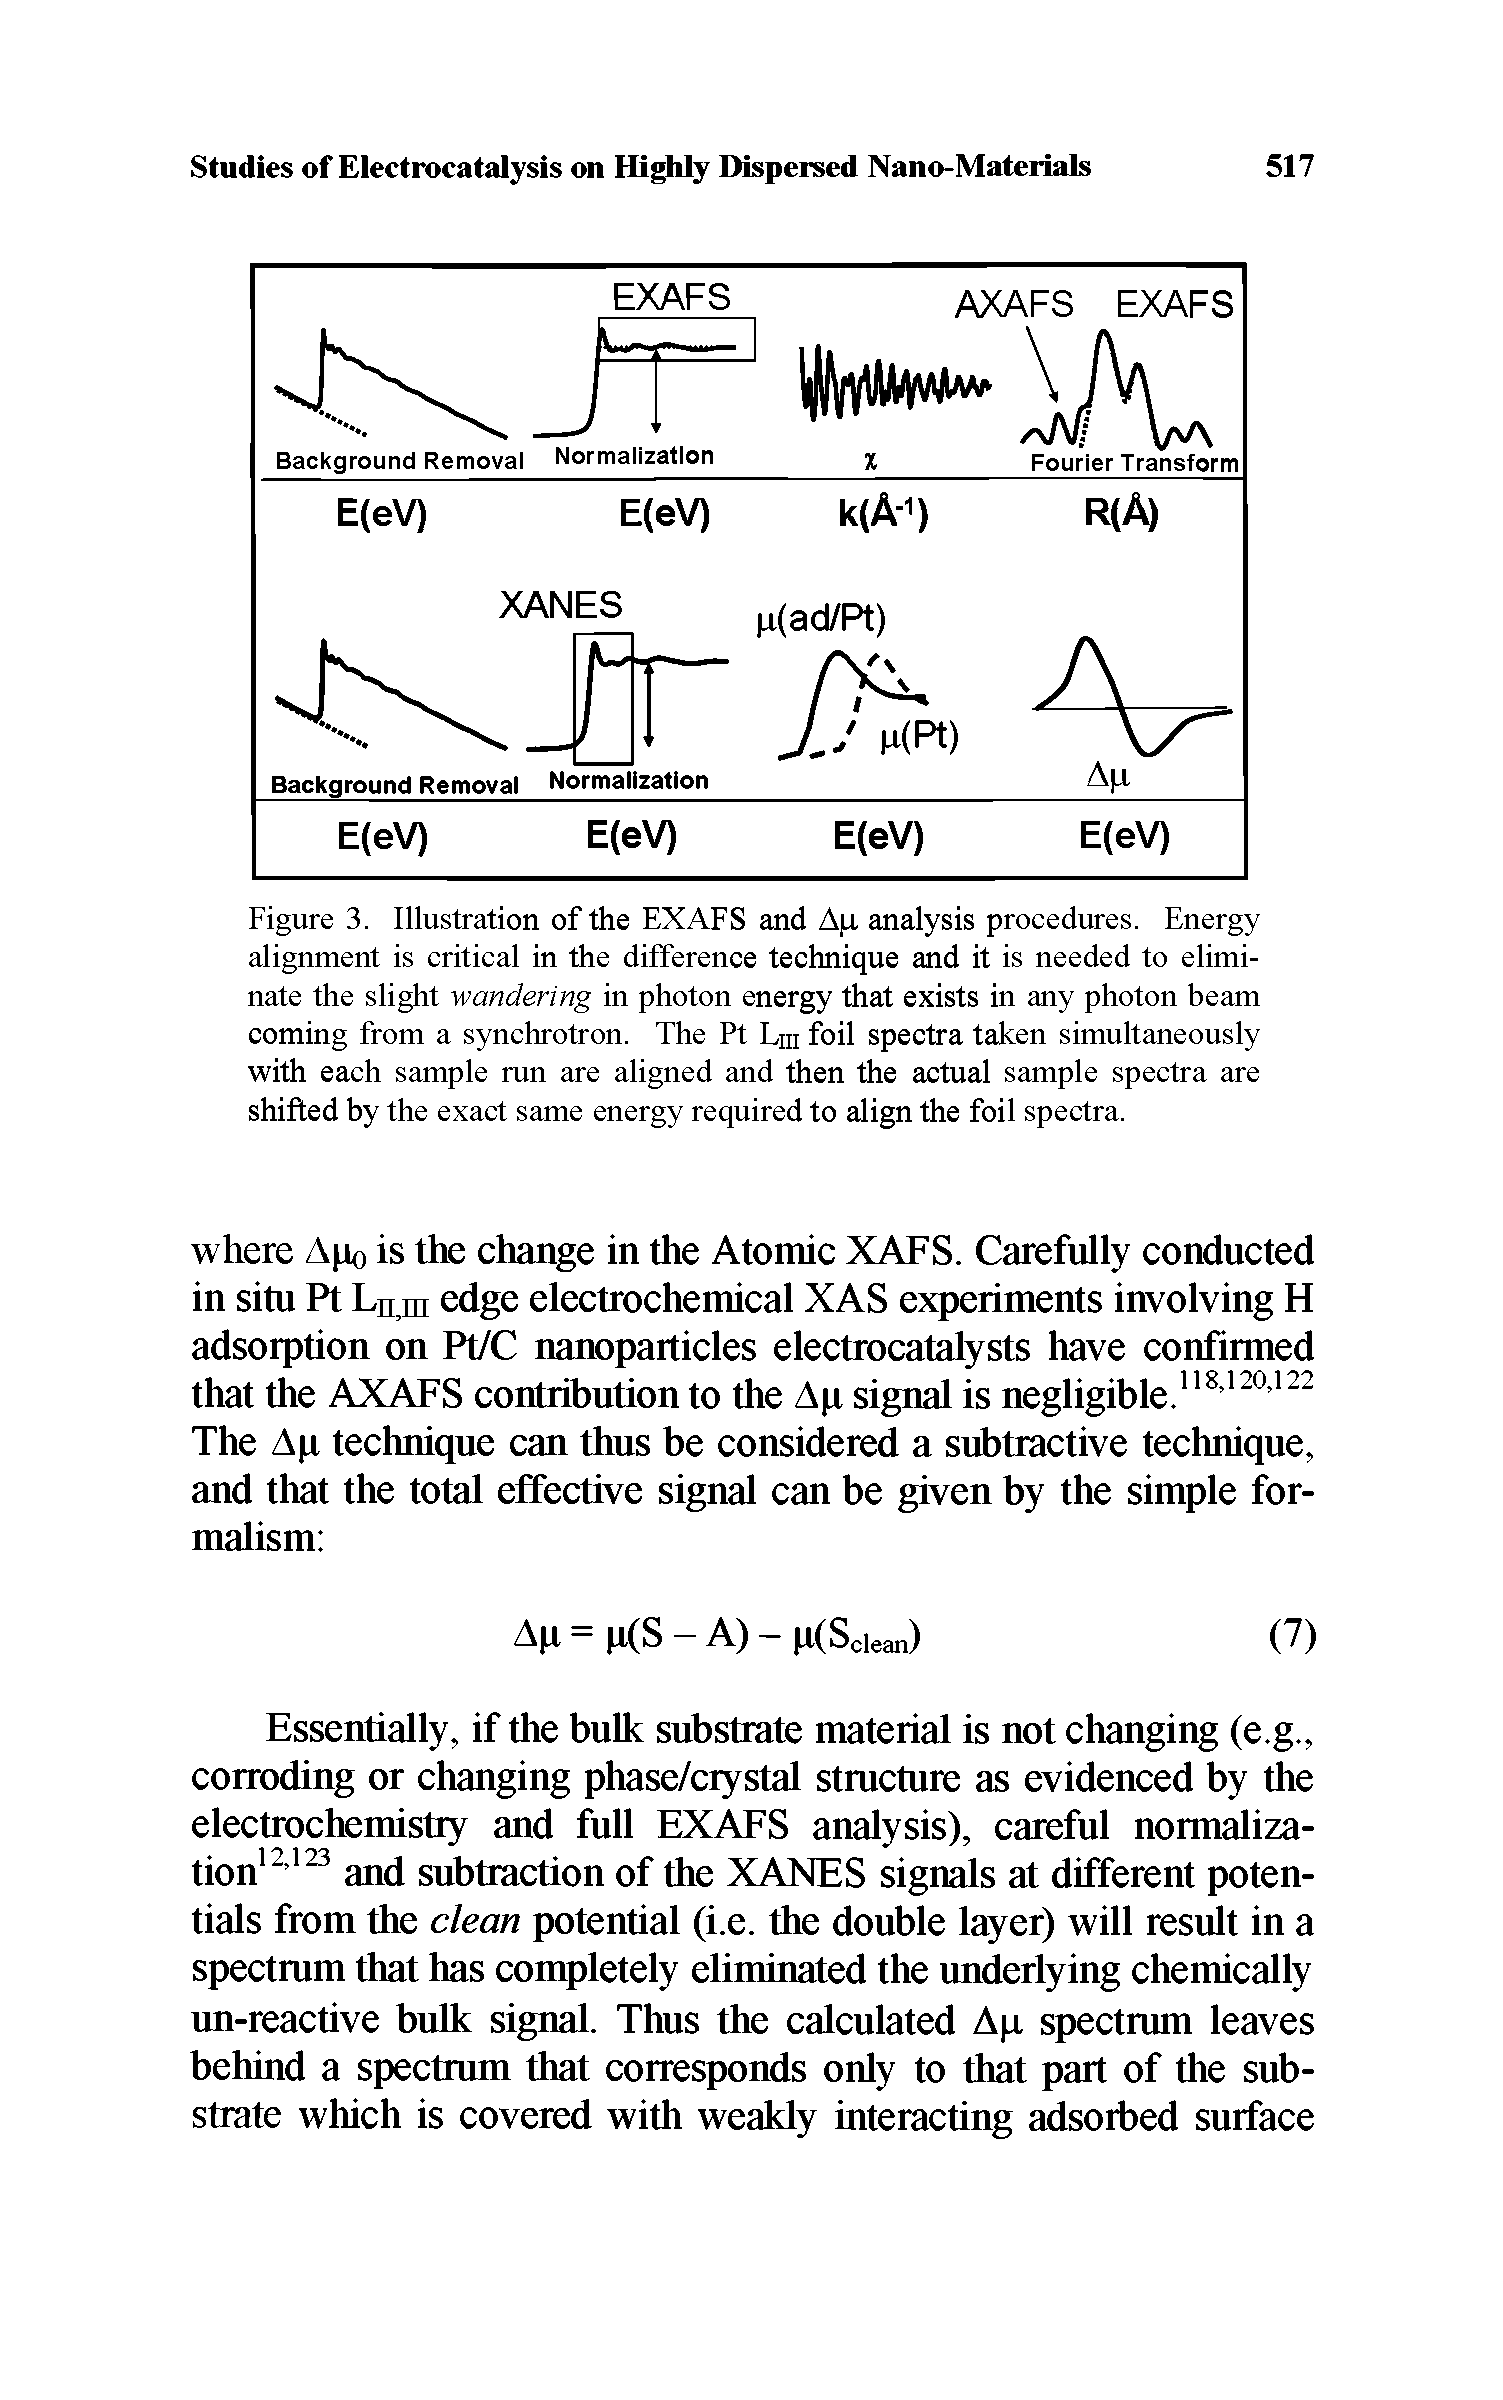 Figure 3. Illustration of the EXAFS and A x analysis procedures. Energy alignment is critical in the difference technique and it is needed to eliminate the slight wandering in photon energy that exists in any photon beam coming from a synchrotron. The Pt Lm foil spectra taken simultaneously with each sample run are aligned and then the actual sample spectra are shifted by the exact same energy required to align the foil spectra.